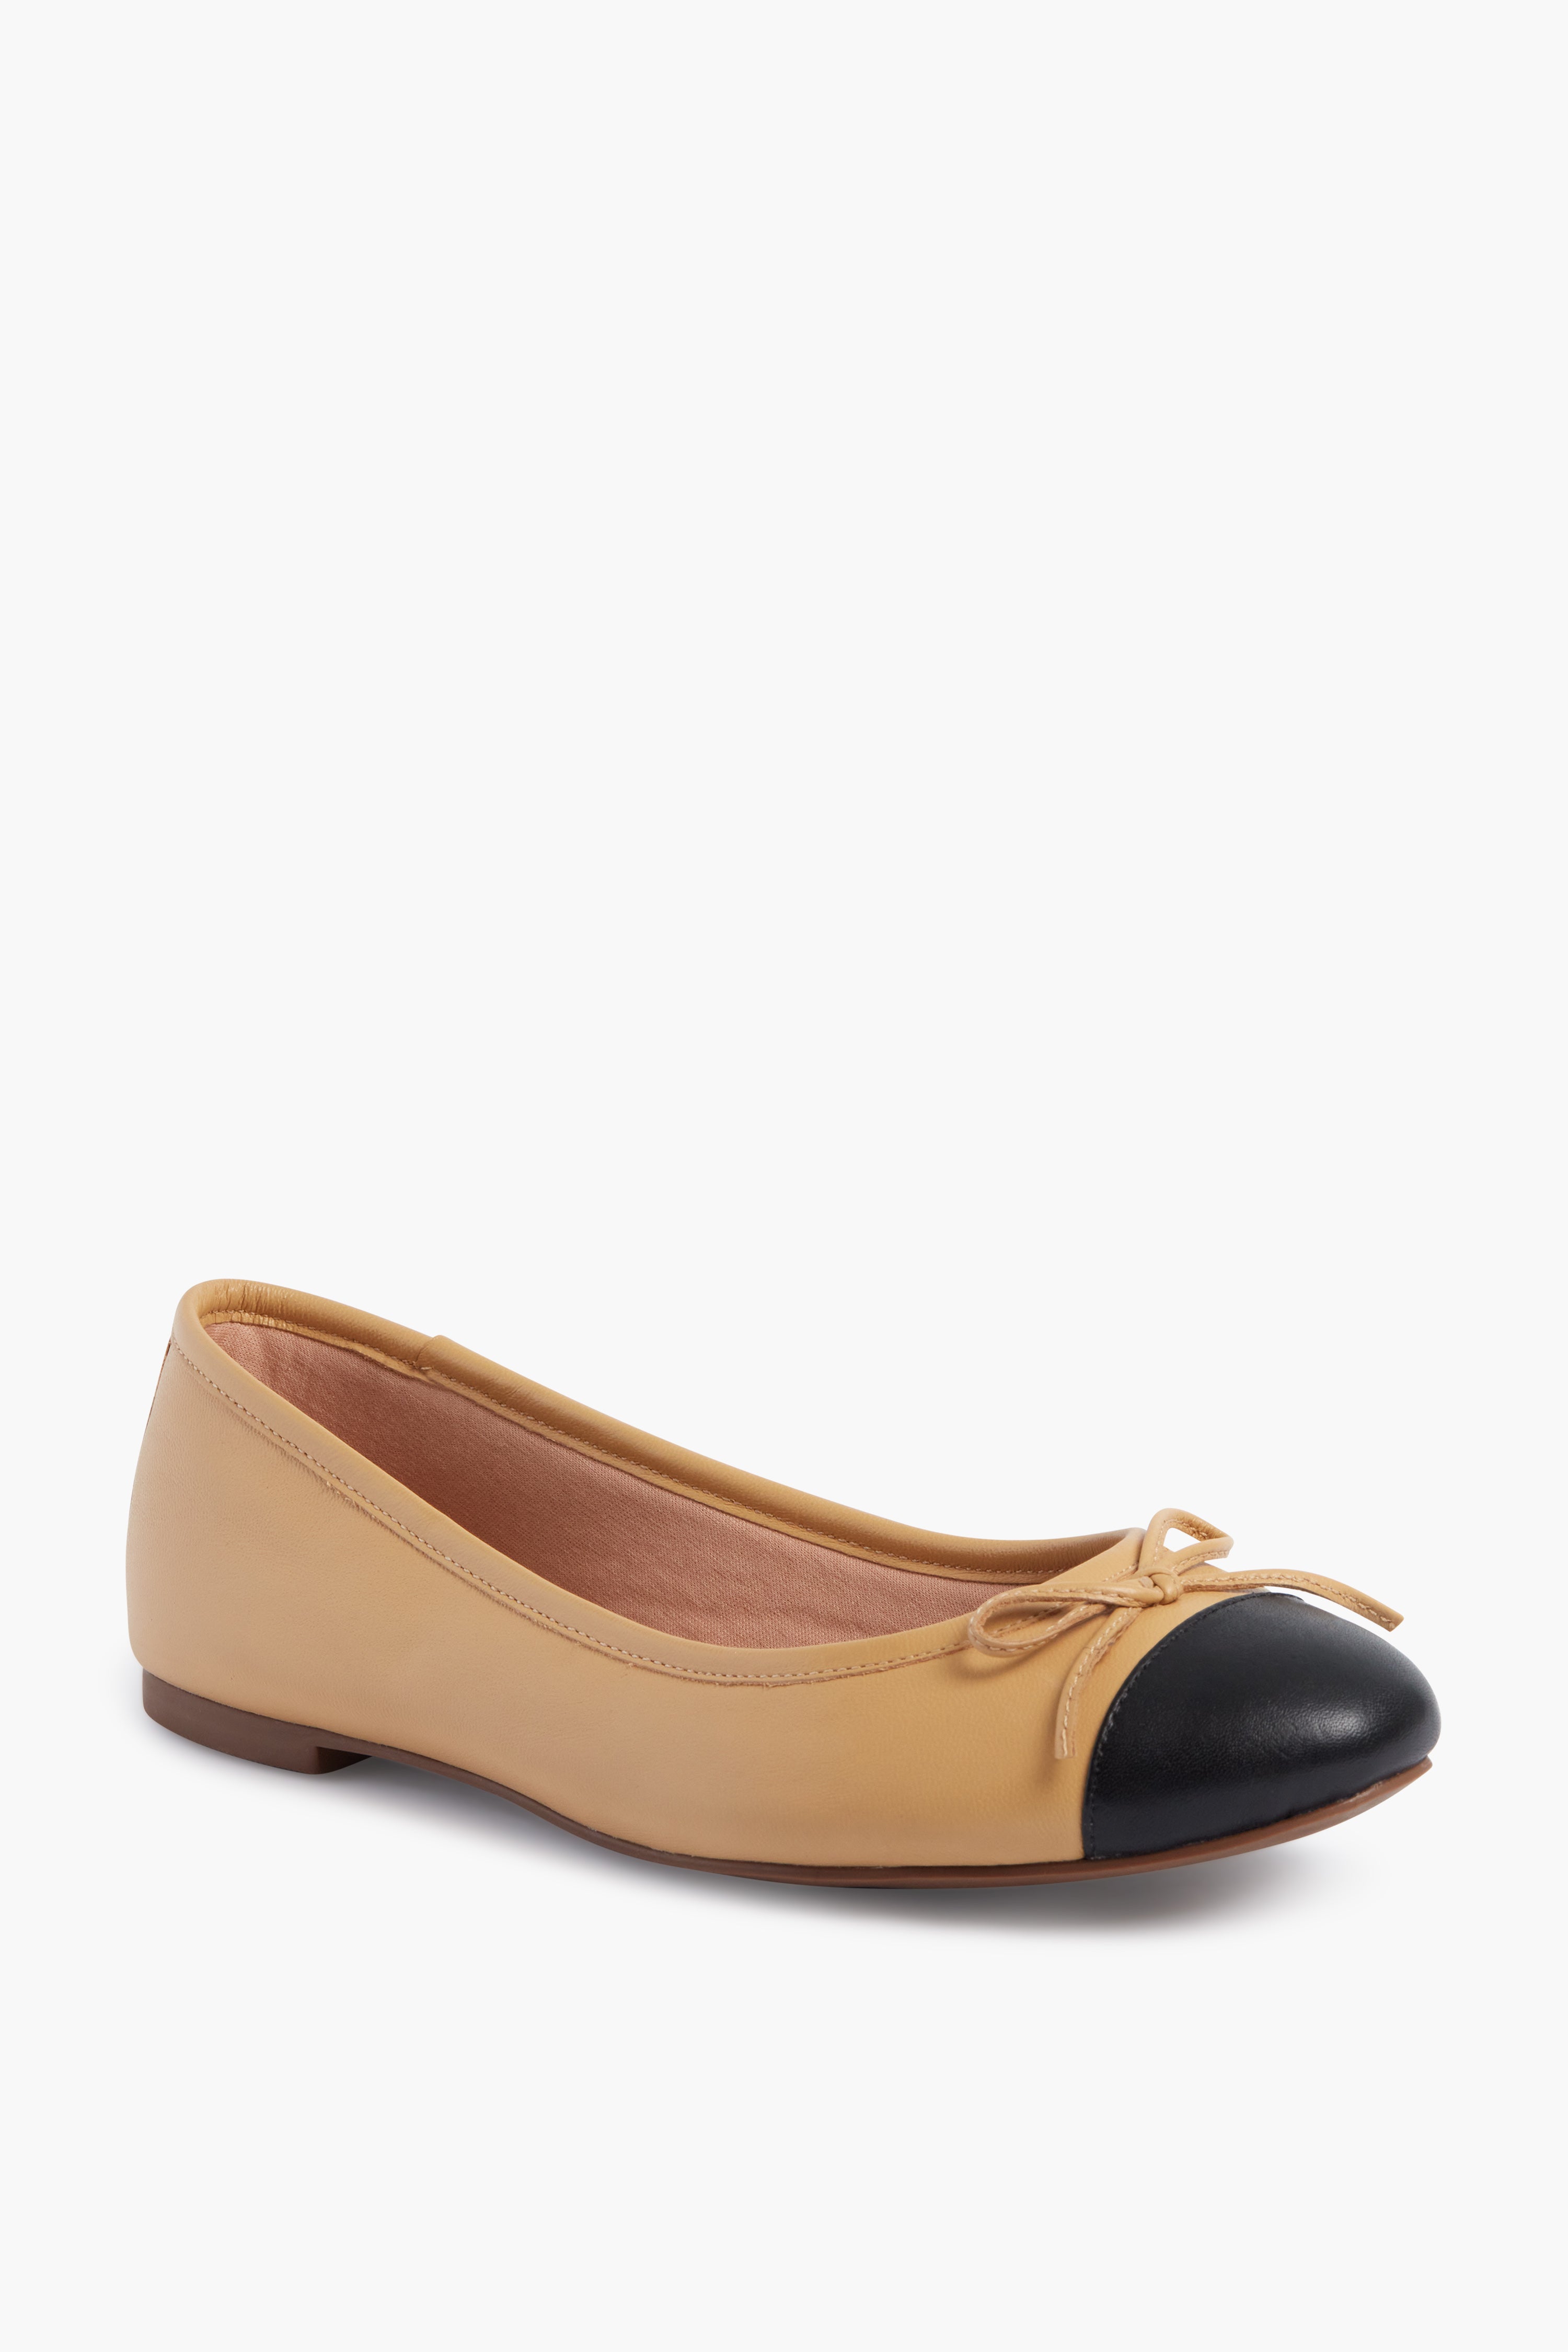 Camille Cap Toe Leather Flats | French Sole Tan / 7